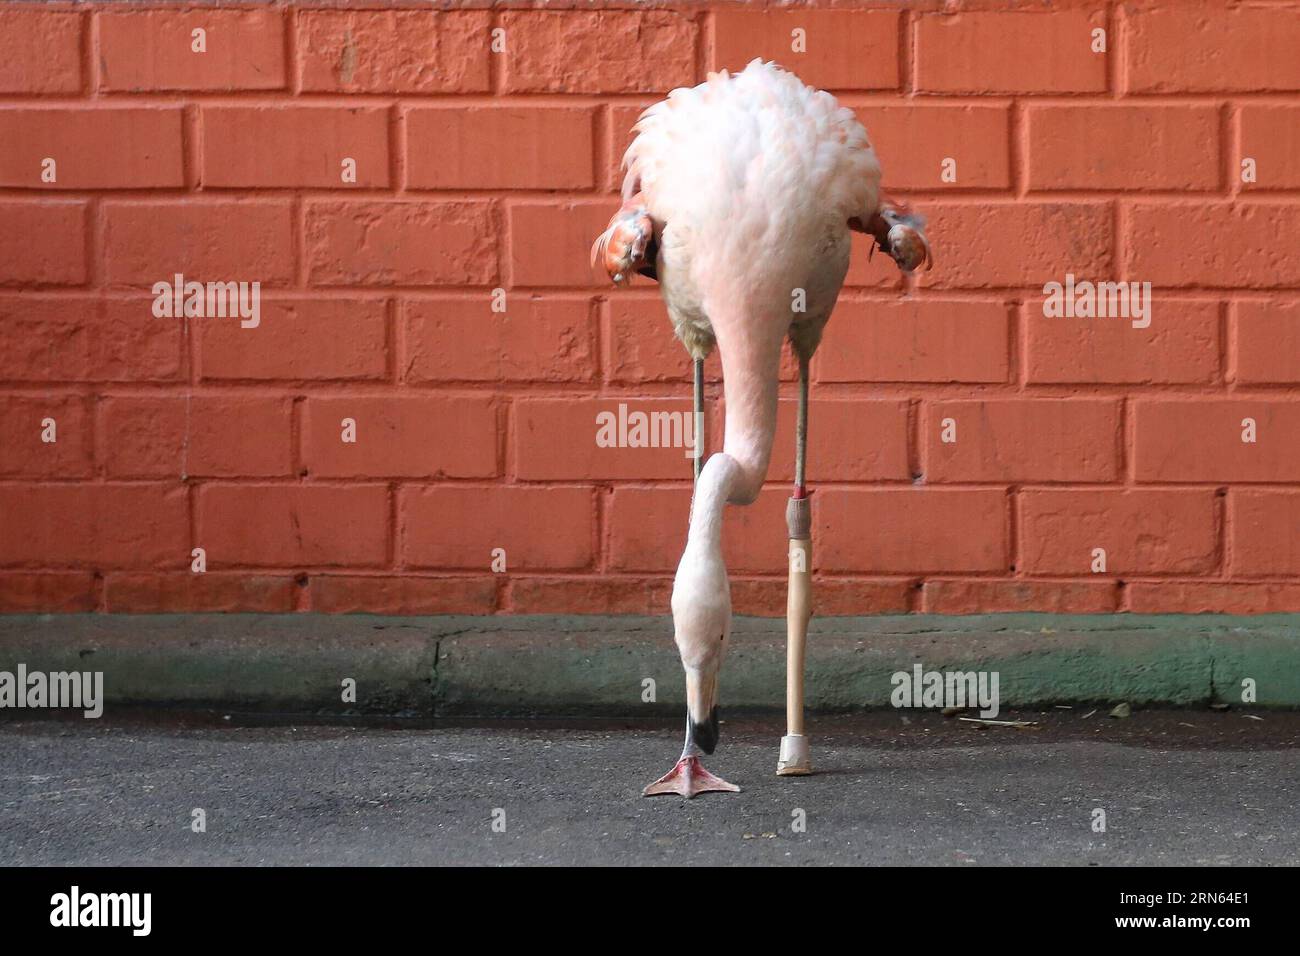 (150711) -- SAO PAULO,  - A Chilean flamingo is pictured with its prosthetic leg at the Municipal Zoo Quinzinho de Barros, in Sorocaba, Sao Paulo State, Brazil, on July 10, 2015. The flamingo of six years, which had its leg amputated, received a new prosthesis of 18 cm that was created from carbon fiber with silicone sleeve by orthopedic businessman Nelson Nole. Rahel Patrasso) (vf) BRAZIL-SAO PAULO-ENVIRONMENT-FLAMINGOS e RahelxPatrasso PUBLICATIONxNOTxINxCHN   150 711 Sao Paulo a Chilean Flamingo IS Pictured With its prosthetic Leg AT The Municipal Zoo  de Barros in Sorocaba Sao Paulo State Stock Photo